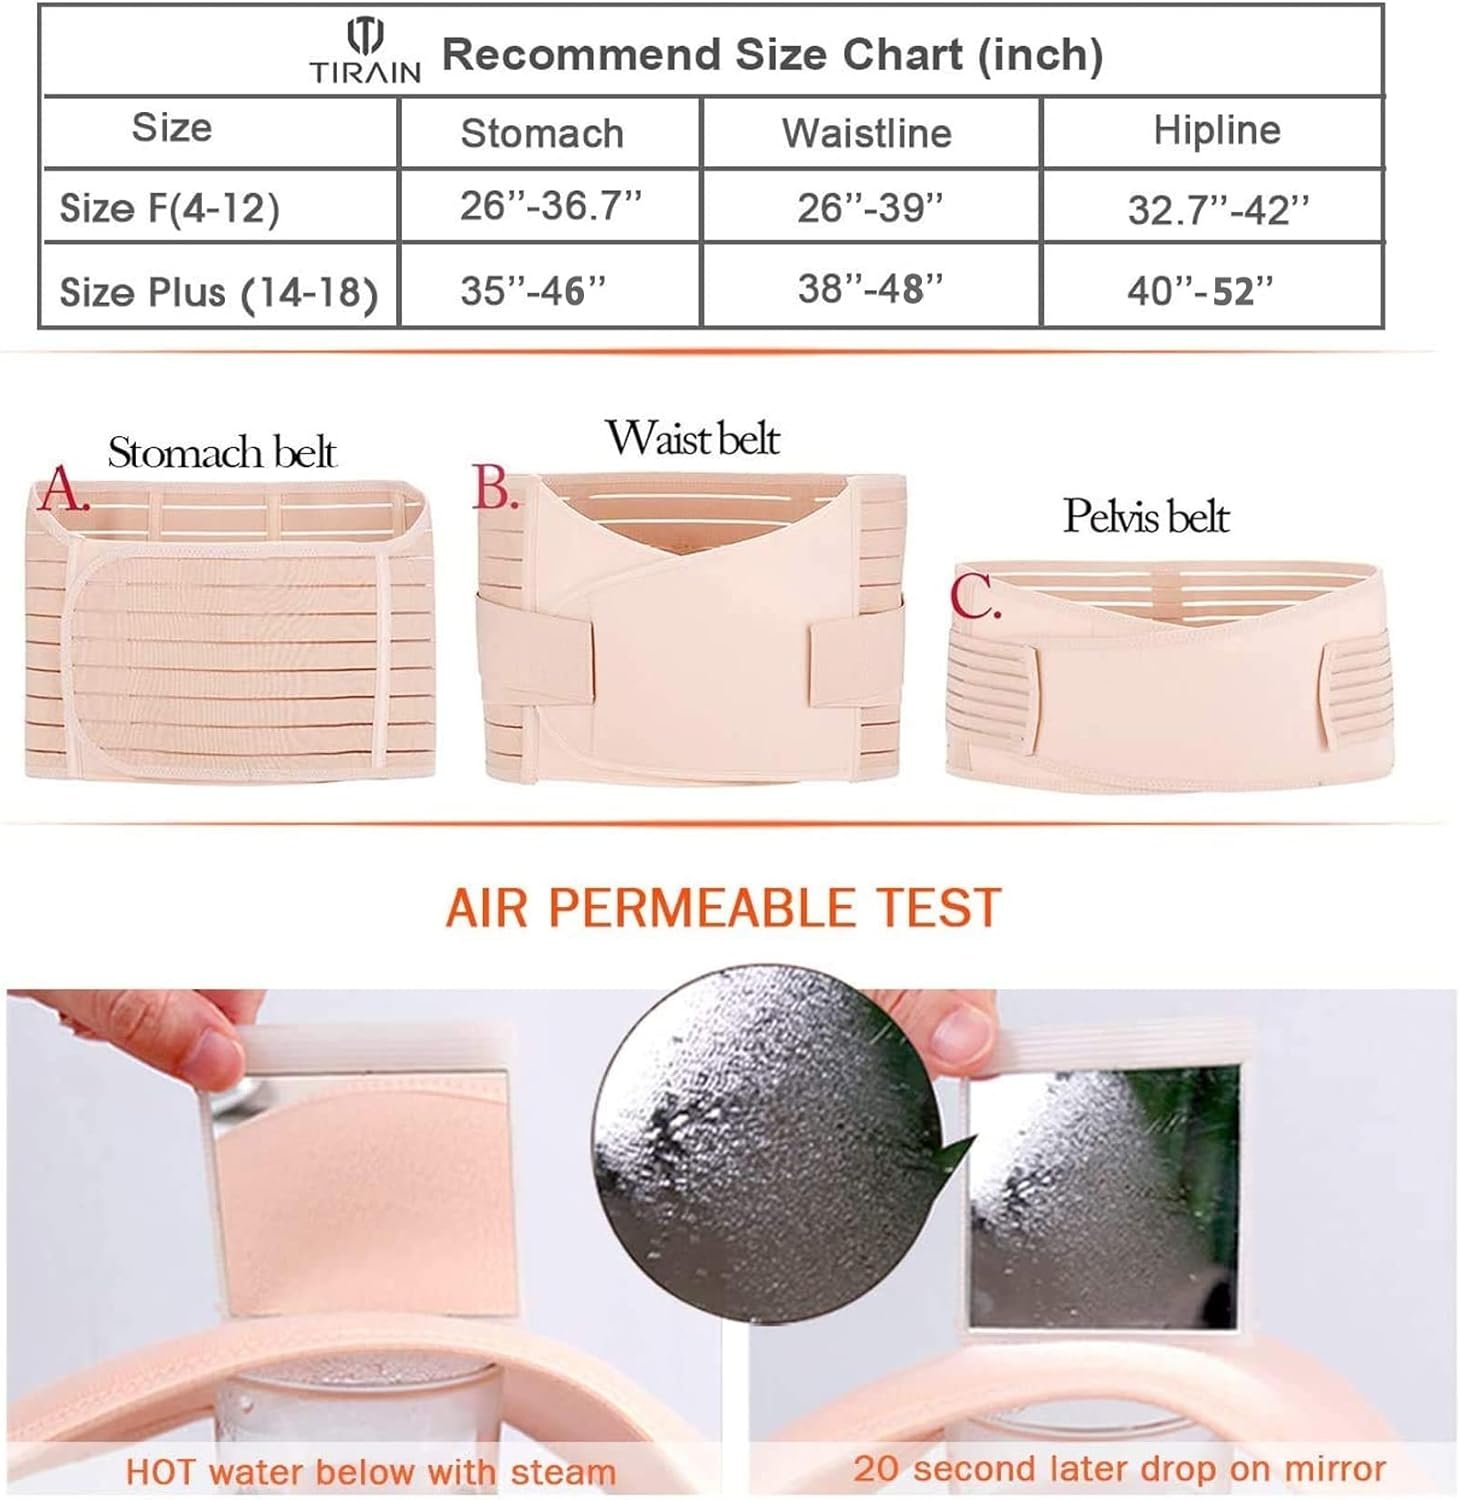 TiRain 3 in 1 Postpartum Belly Support Recovery Belly/Waist/Pelvis Belt C Section Postpartum Belly Wrap Band Corset waist trainer